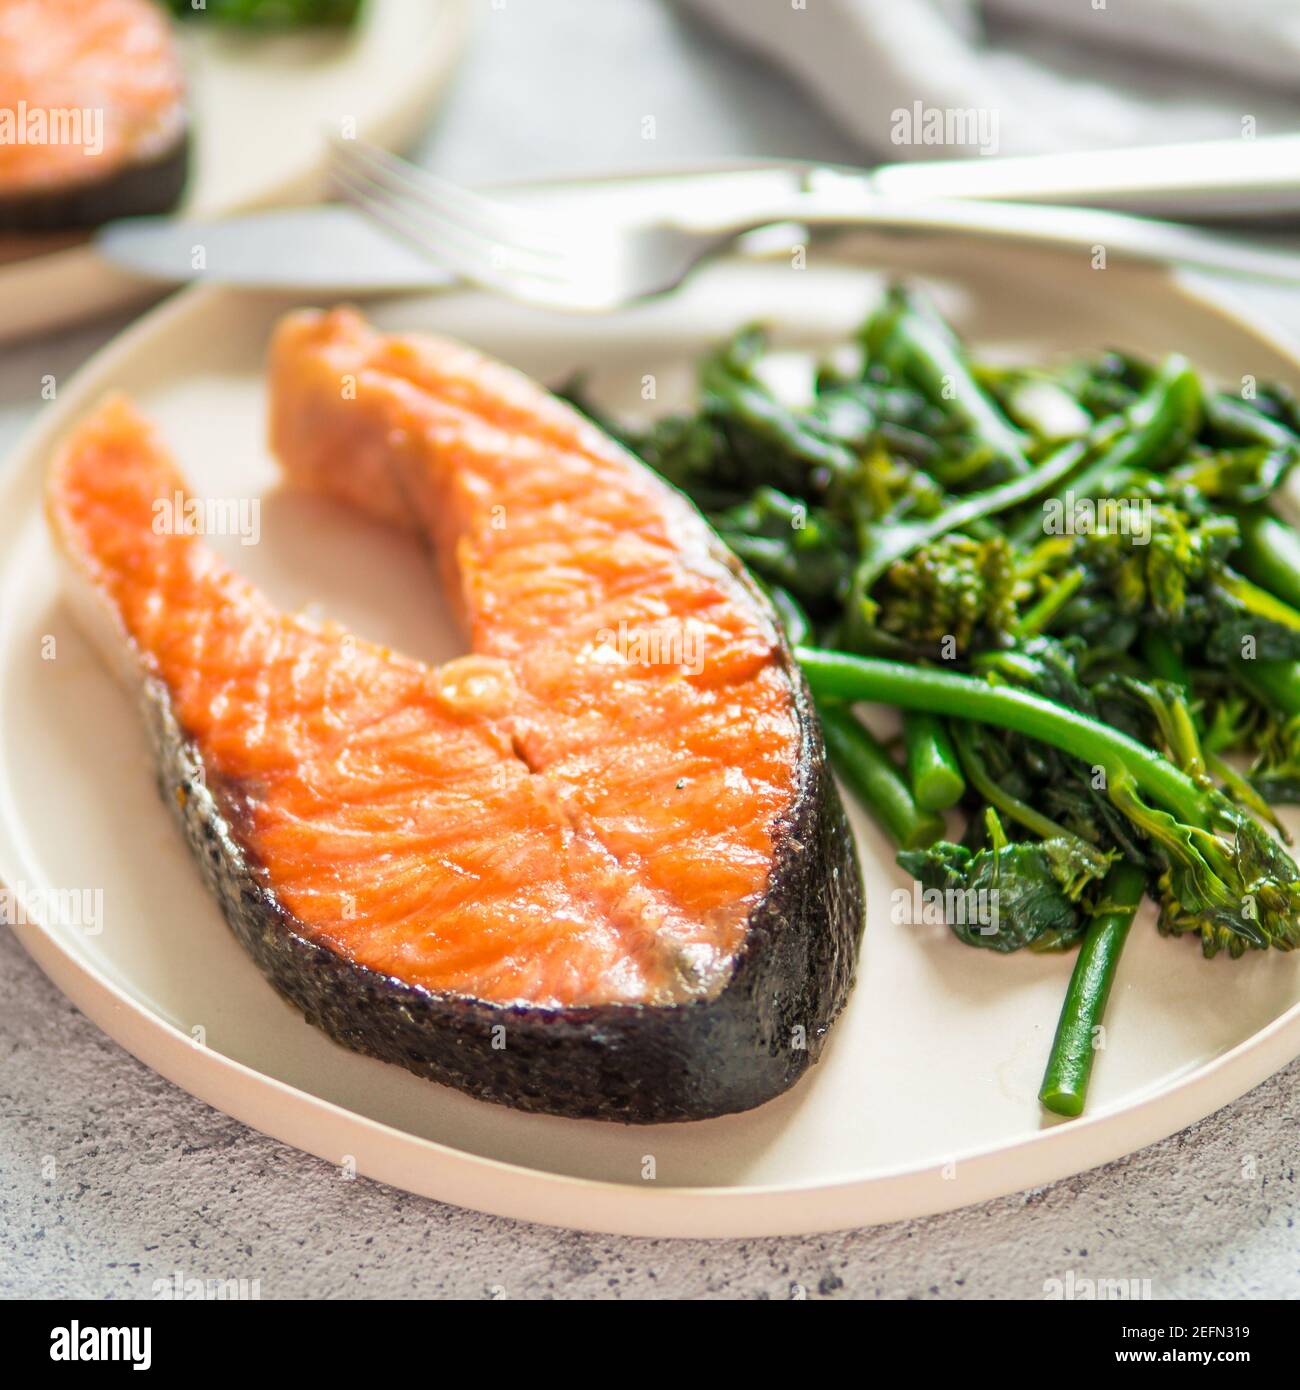 Ready-to-eat grilled salmon steak and greens - baby broccoli or broccolini and spinach on rustic craft plate over gray background. Keto diet dish. Stock Photo